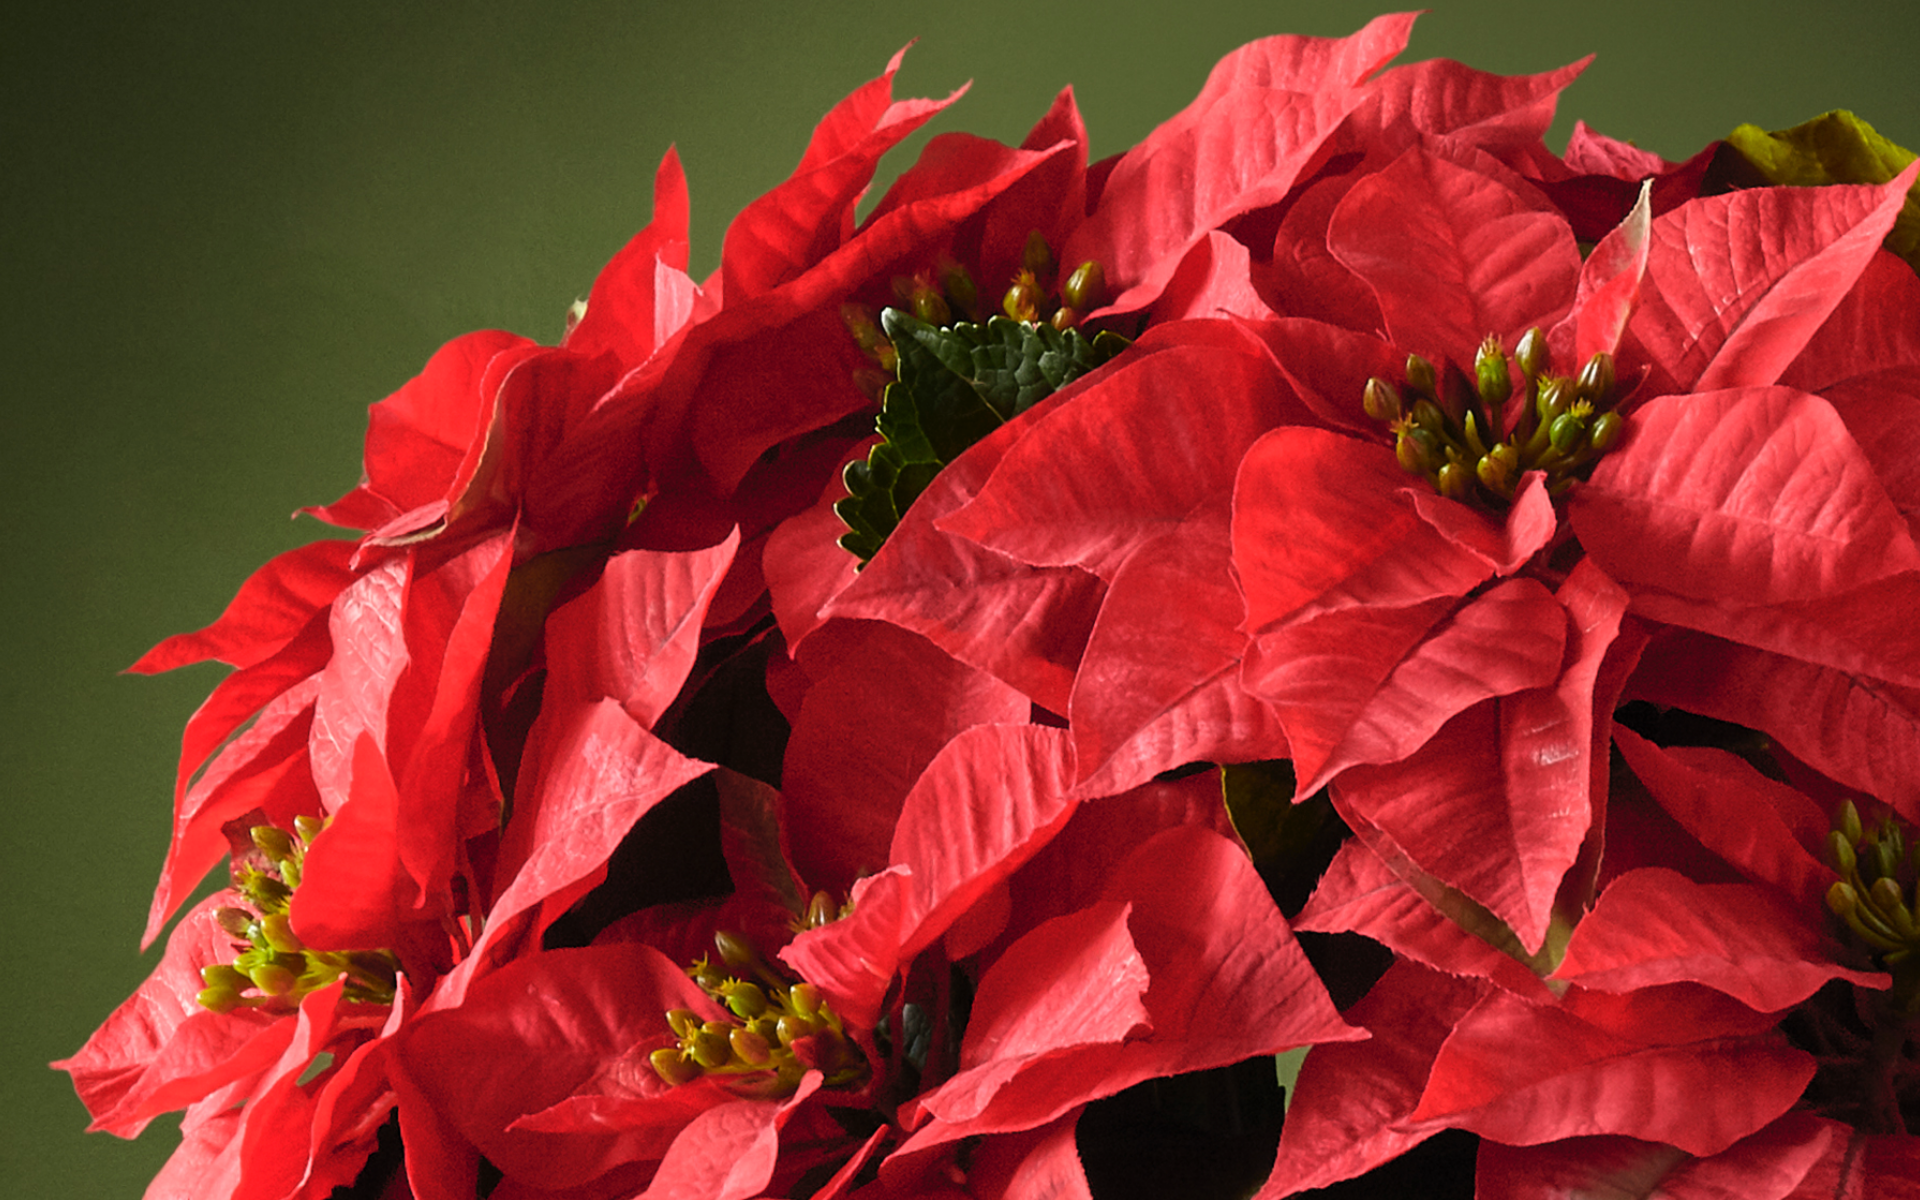 Image of red poinsettia